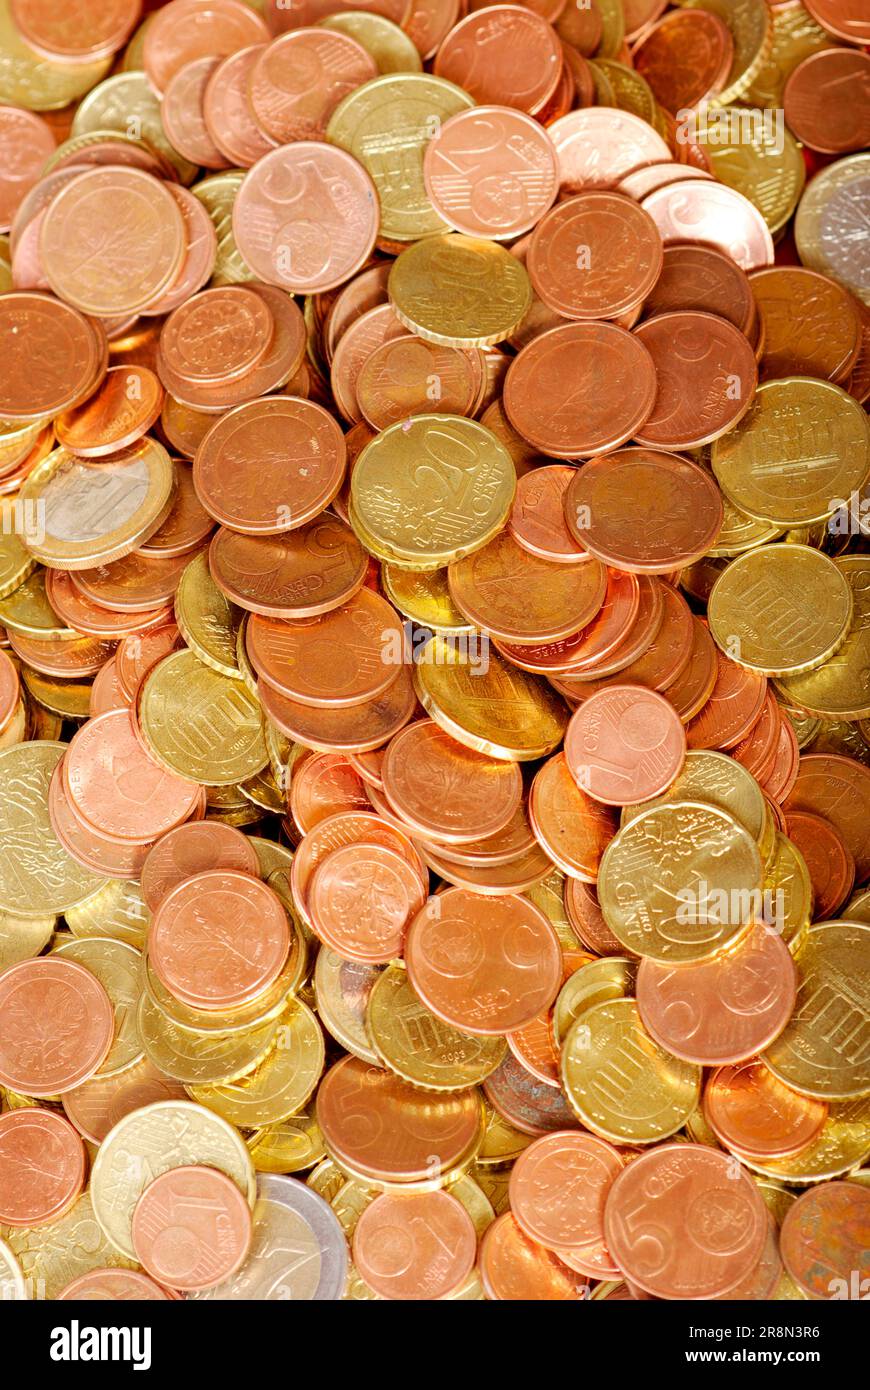 Euro coins, small change Stock Photo